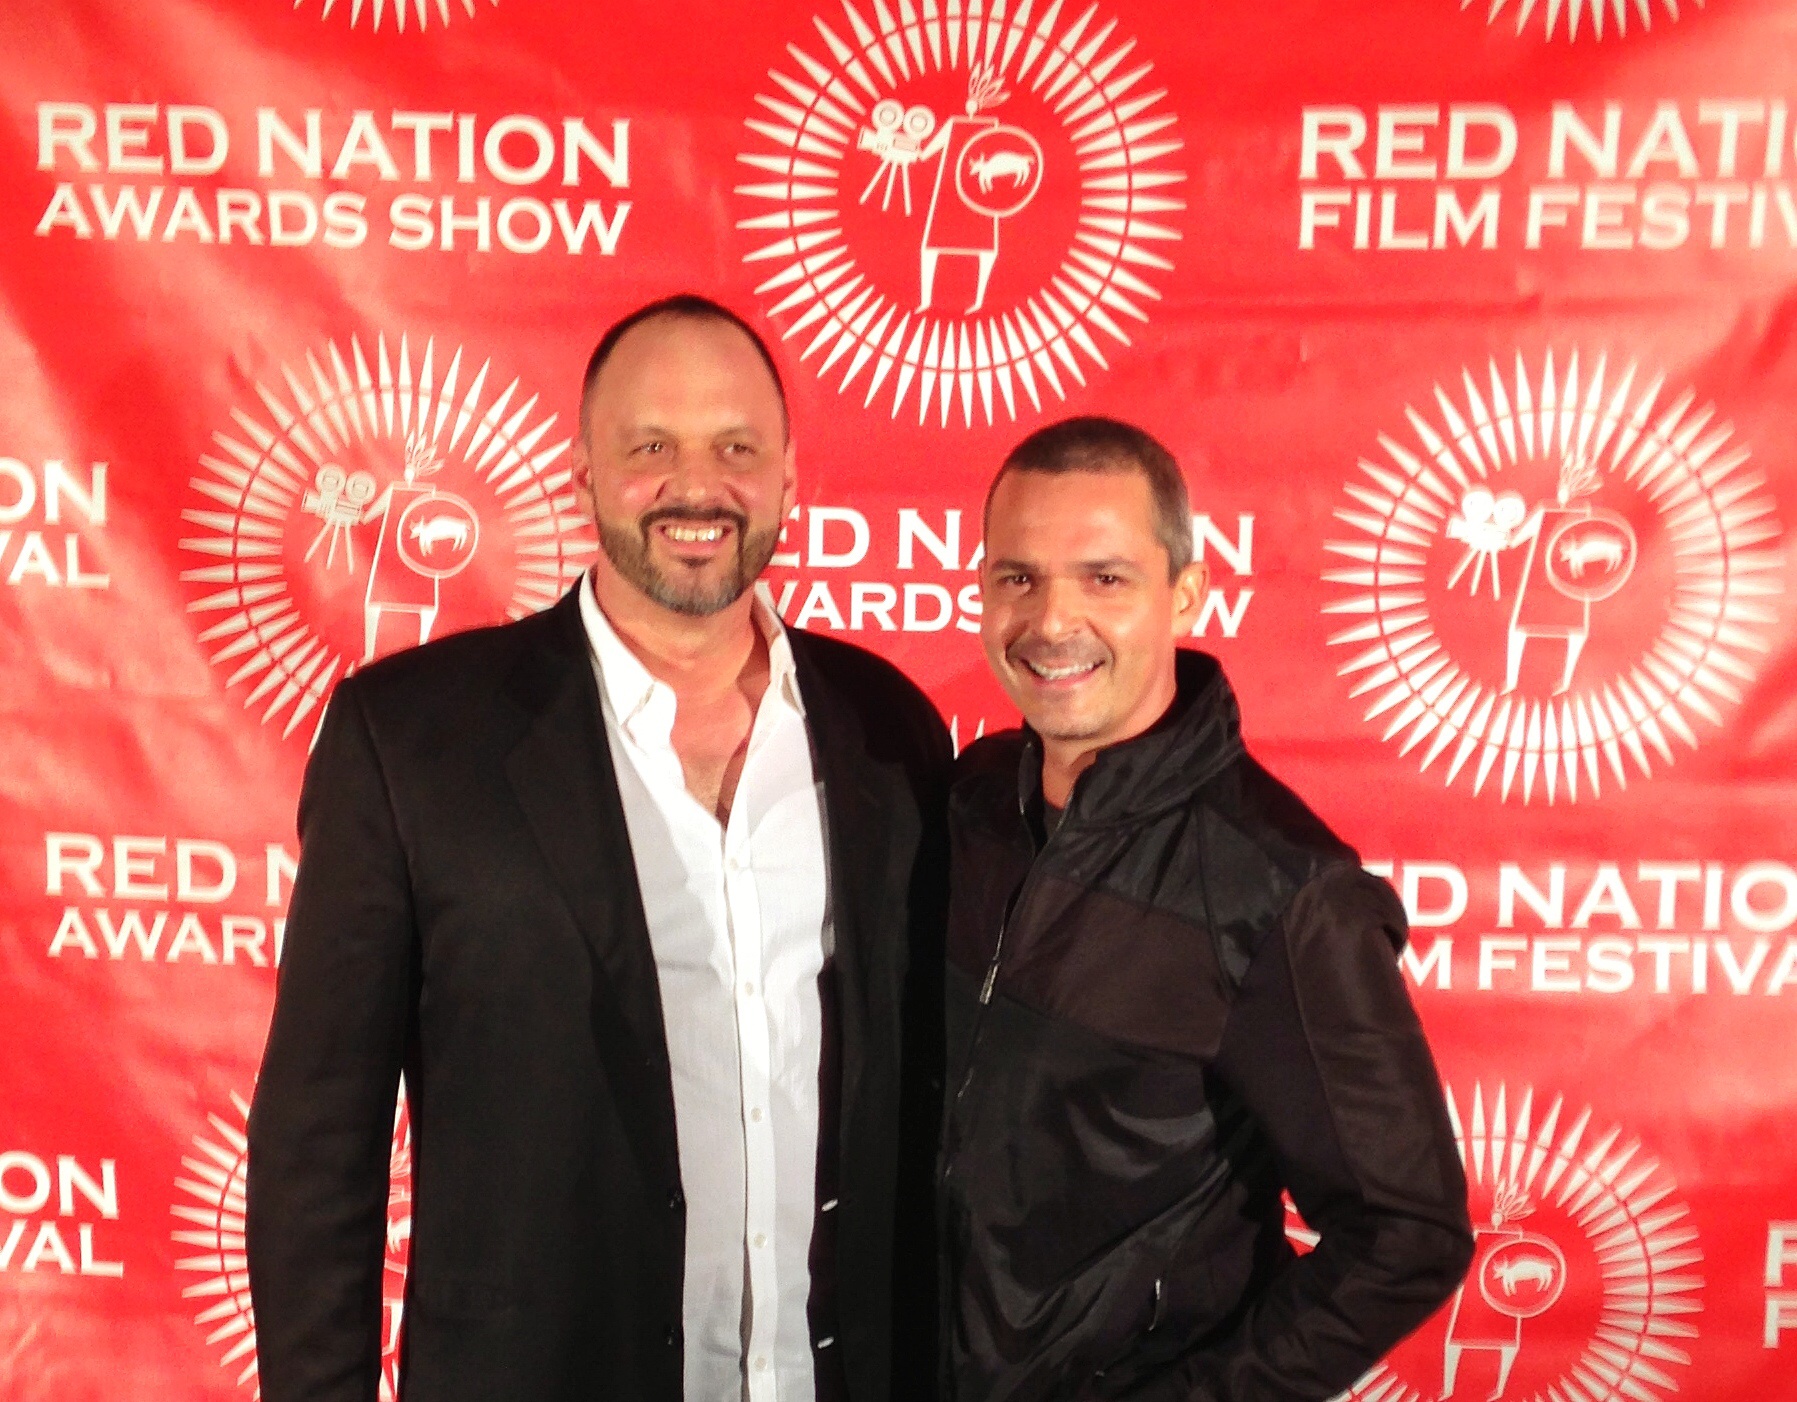 Director David Llauger Meiselman and Actor/Producer Billy Gallo At Strike One Red Carpet premiere